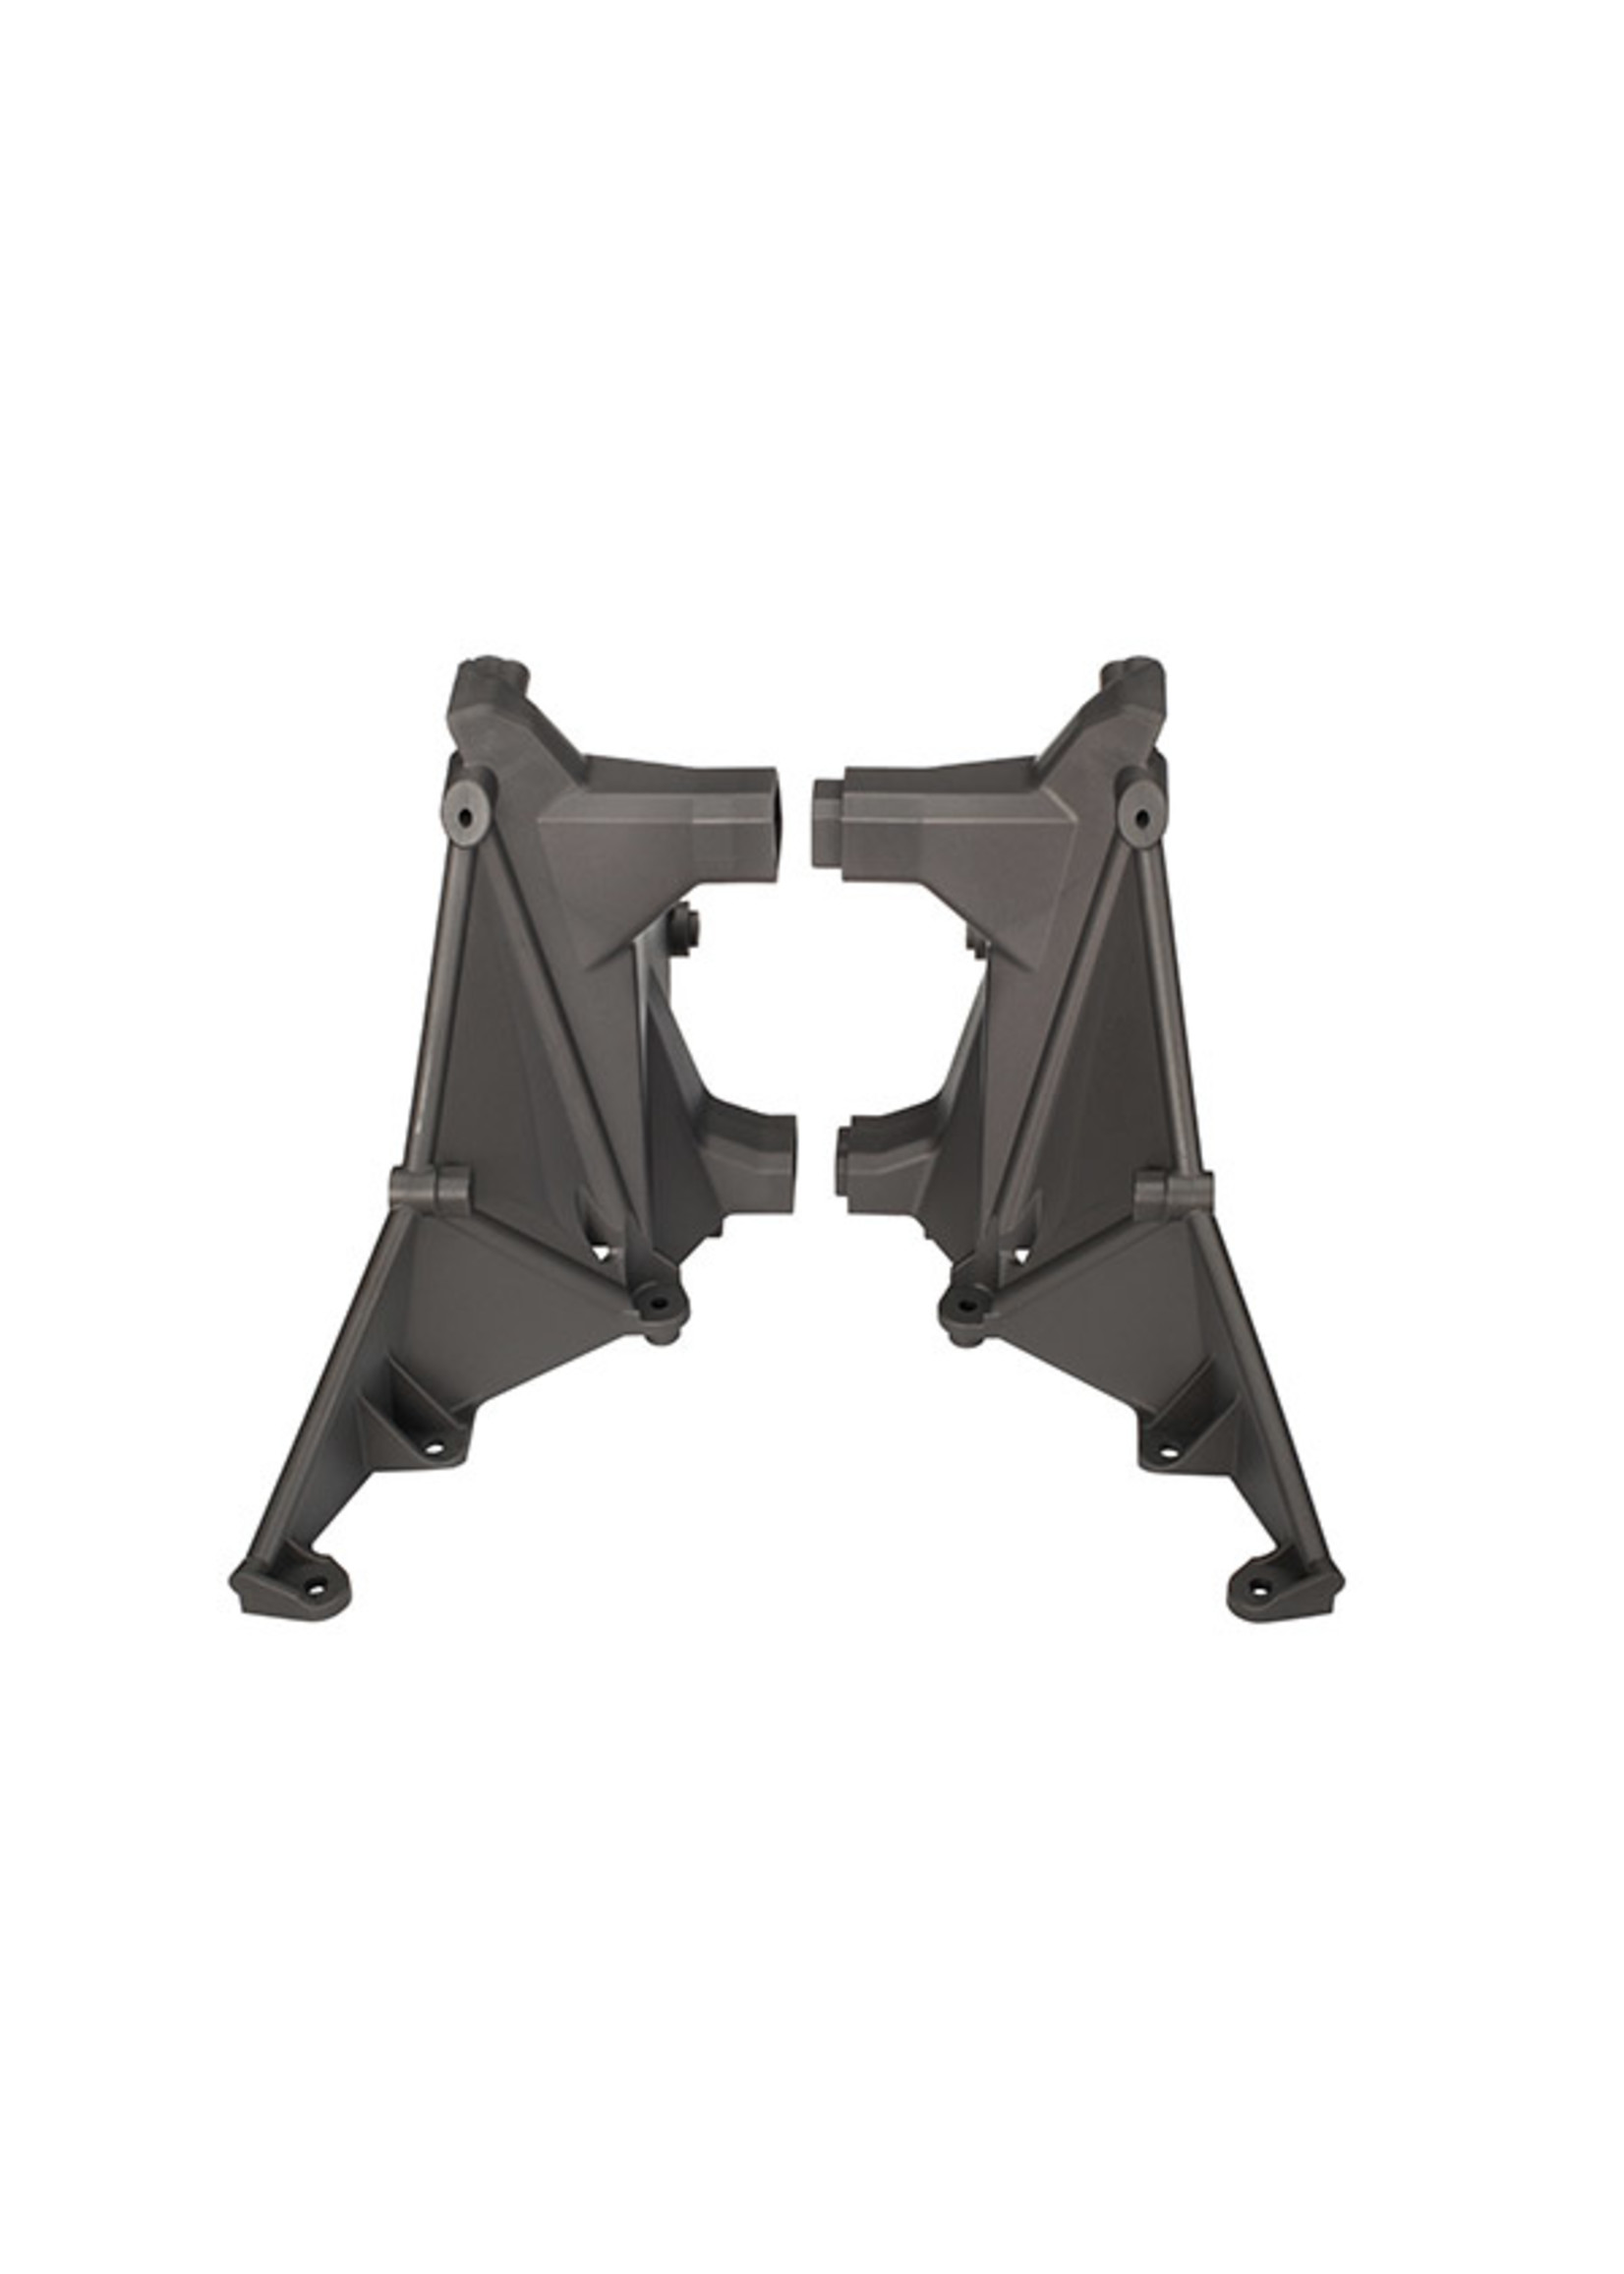 Traxxas 7739 - Shock Tower Front (Left and Right Halves) for X-Maxx